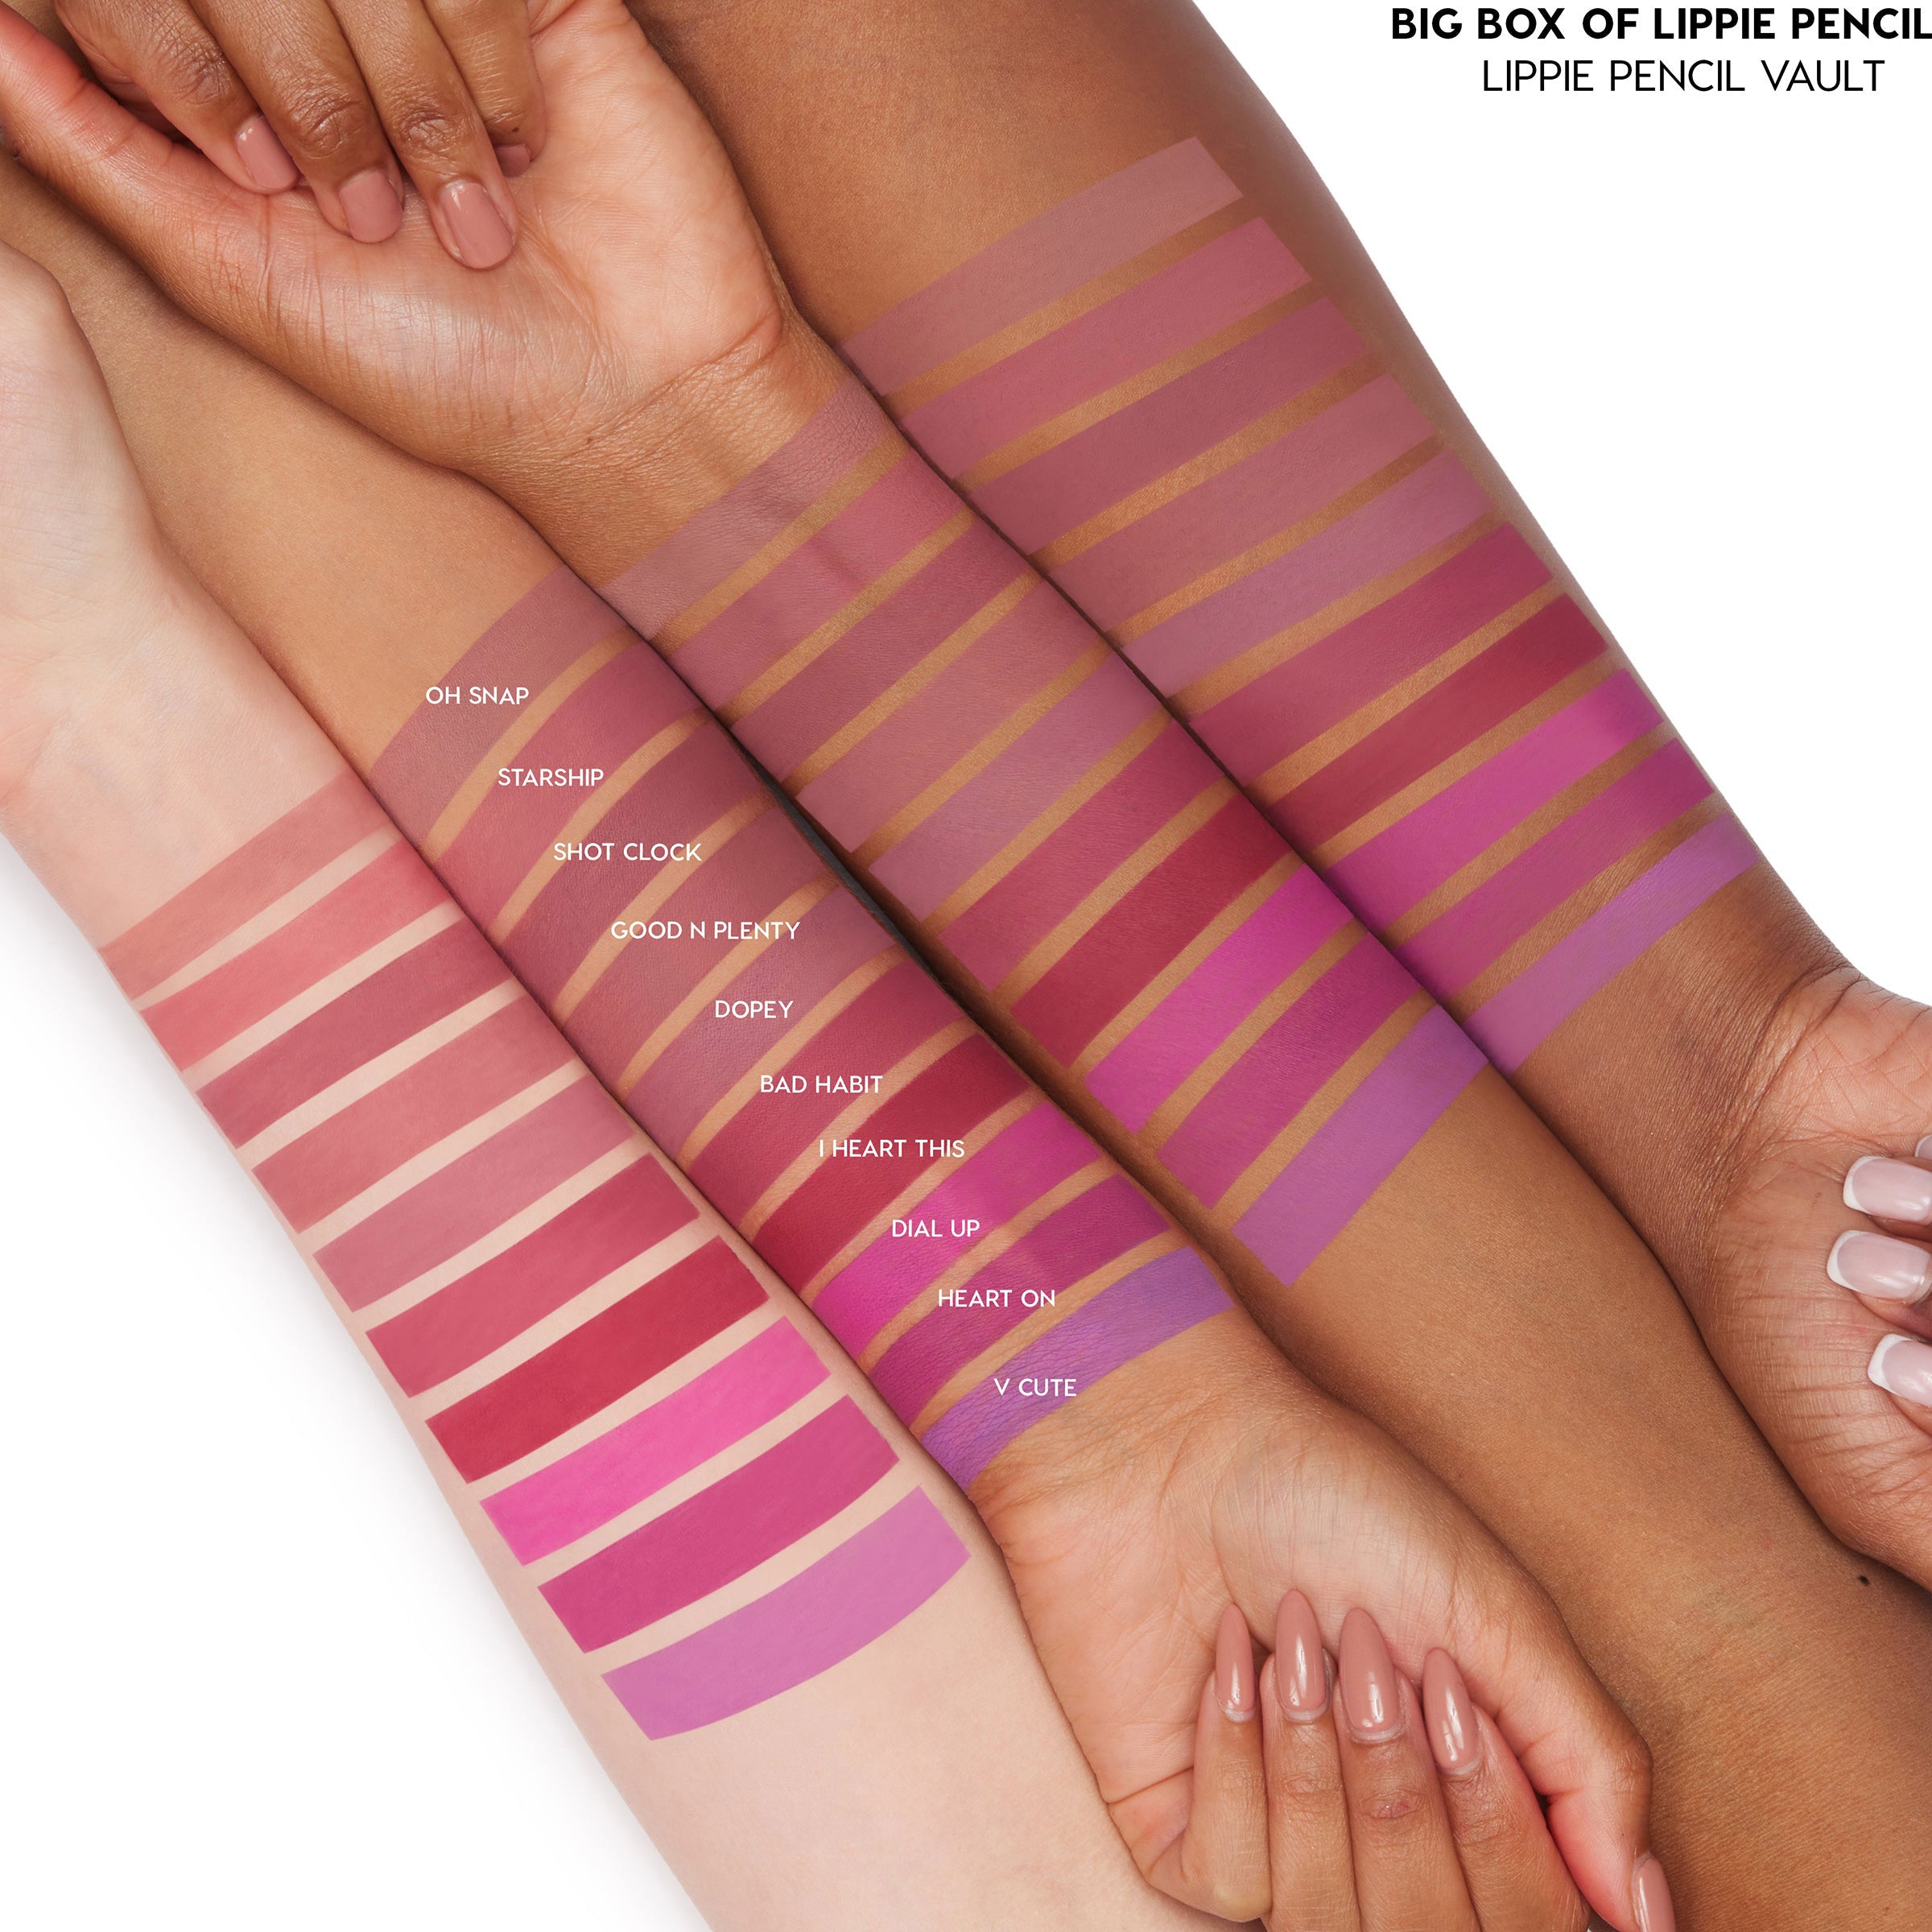 ColourPop Lippie Pencils in Oh Snap, a muted pink shade arm swatch